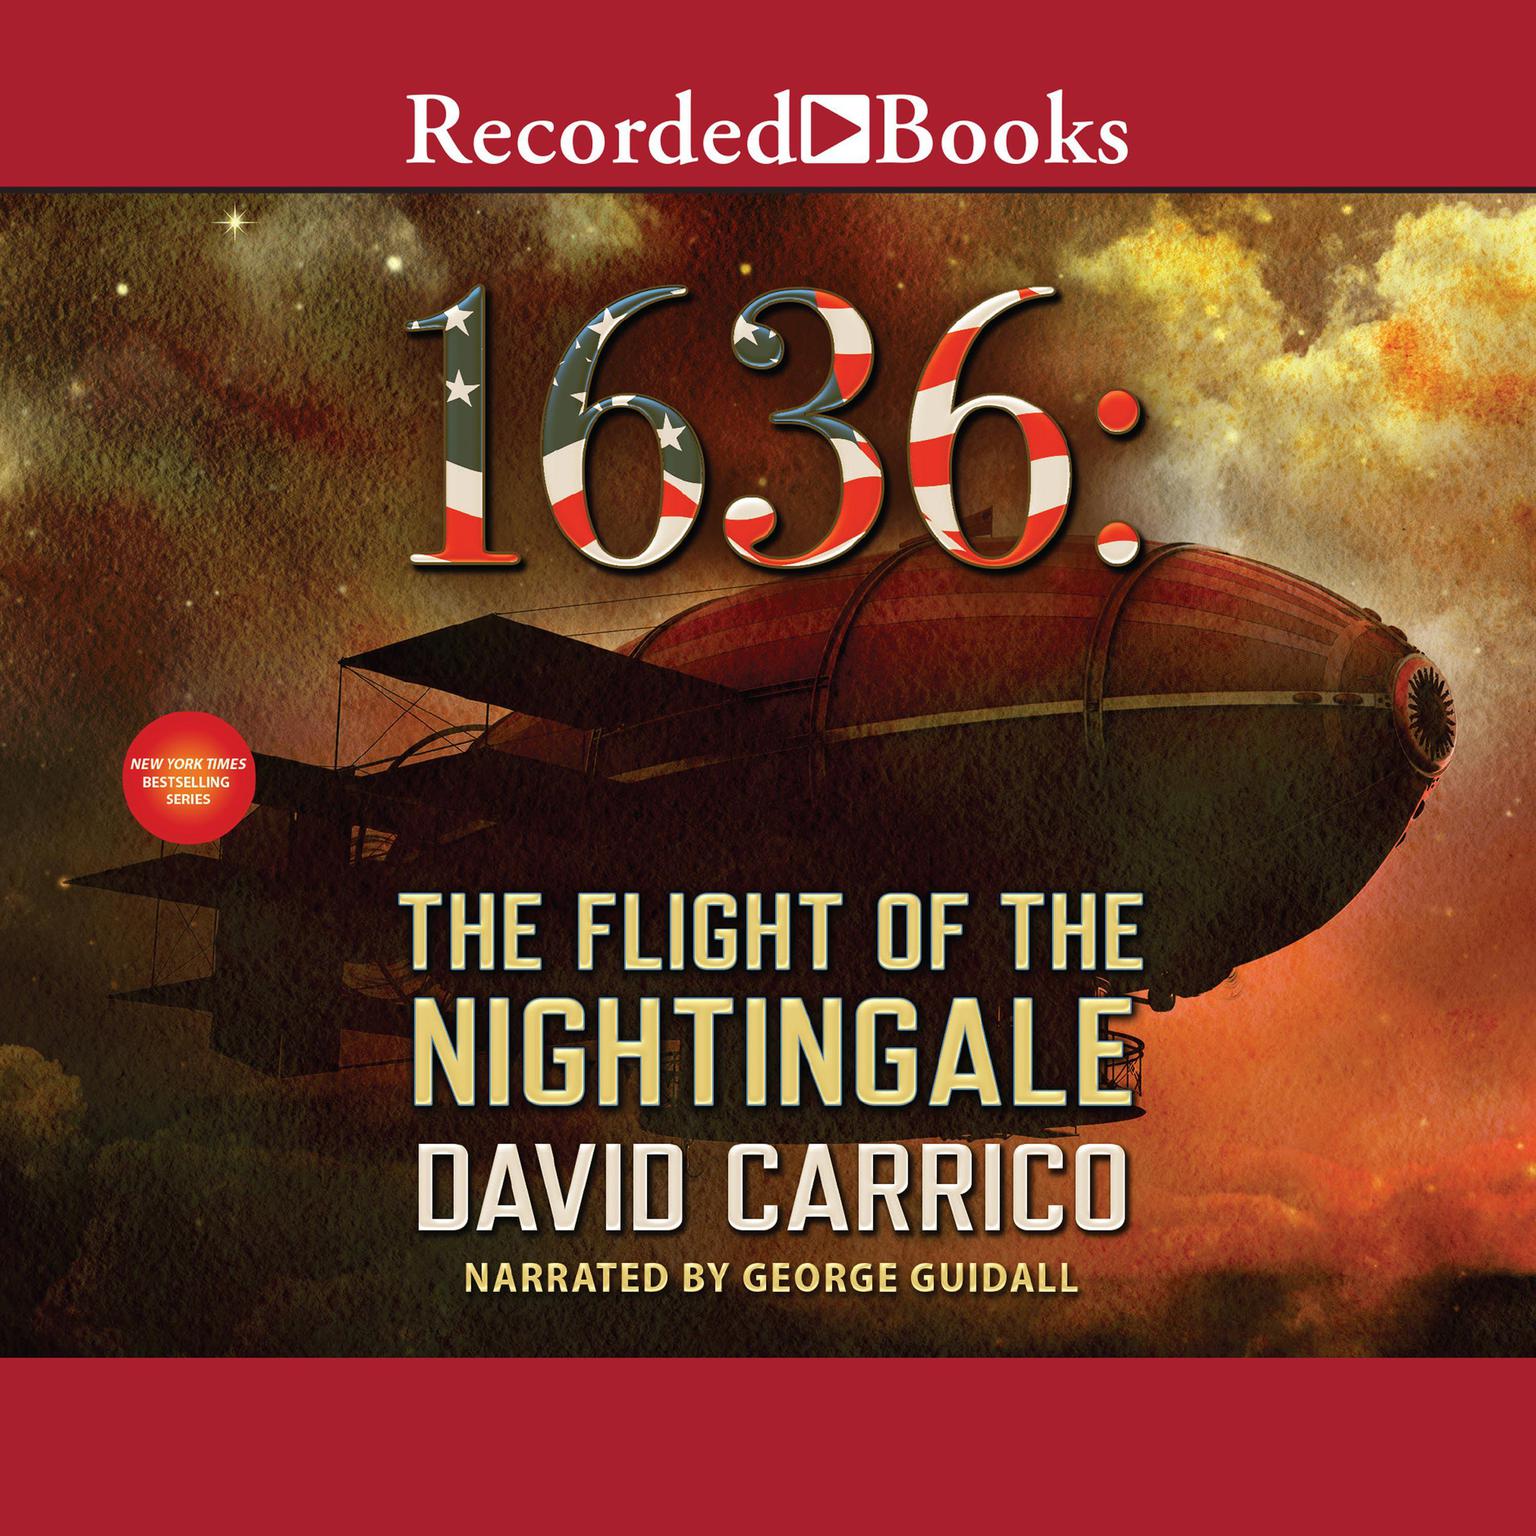 1636: The Flight of the Nightingale Audiobook, by David Carrico